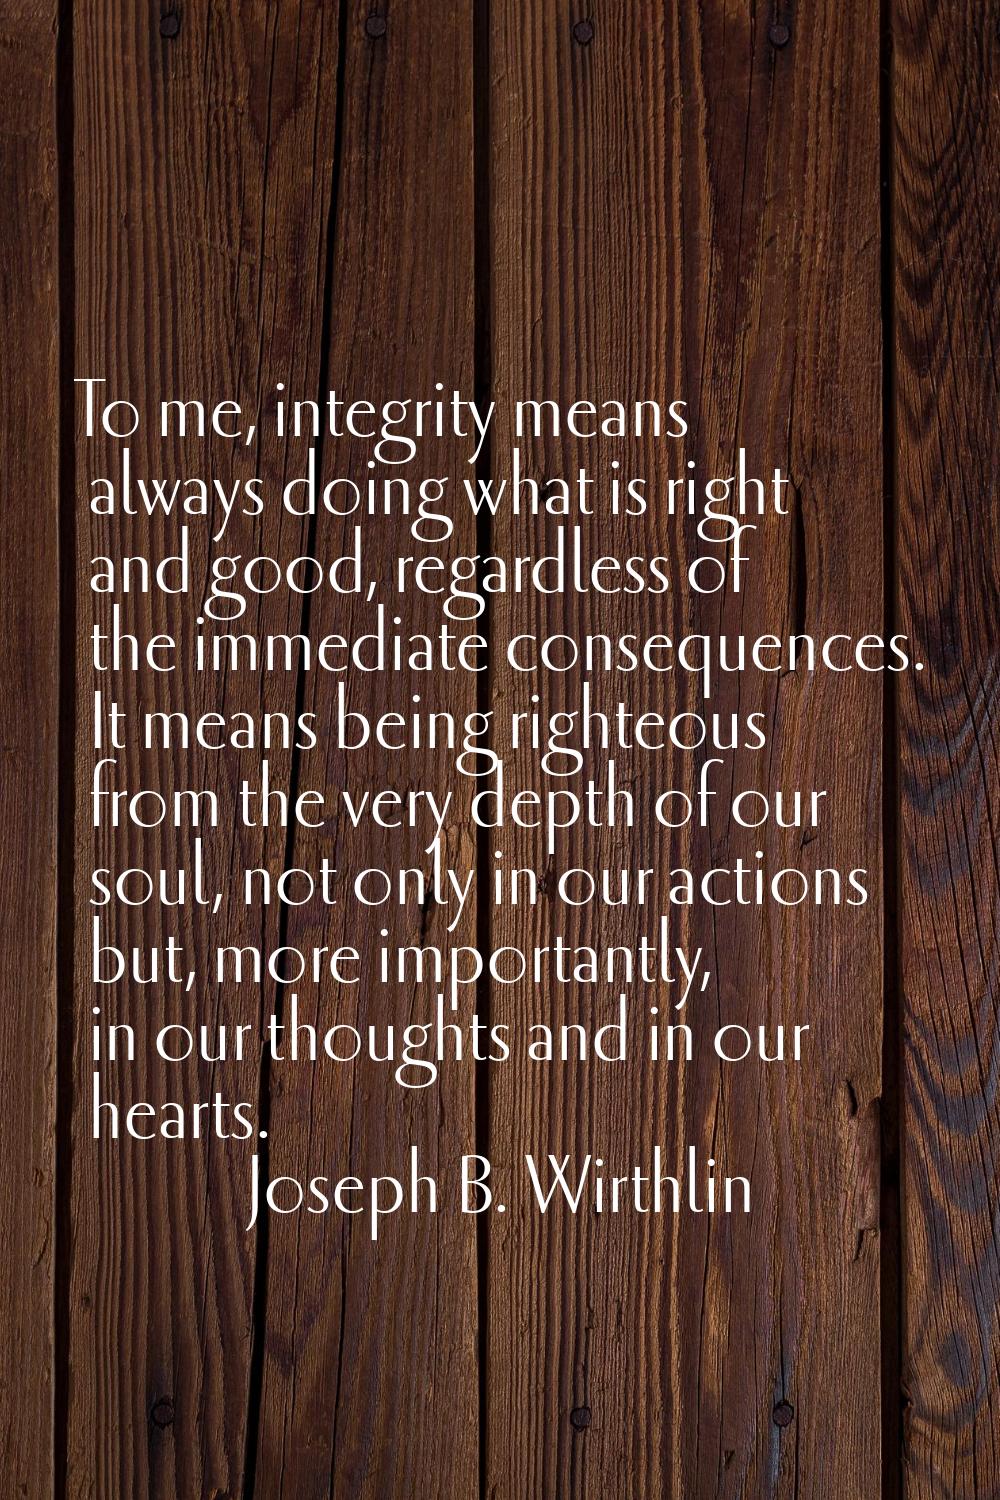 To me, integrity means always doing what is right and good, regardless of the immediate consequence